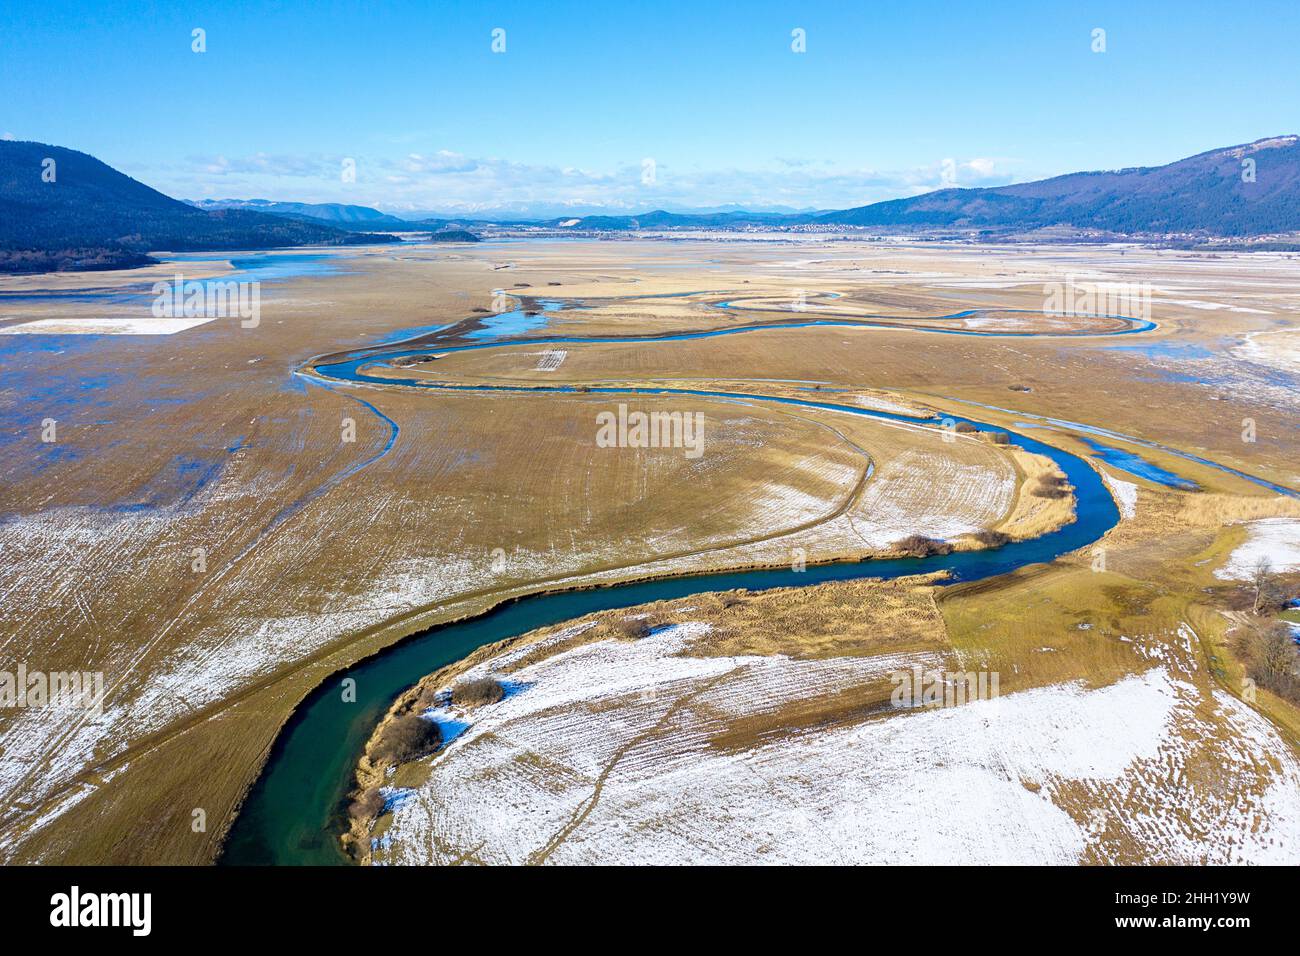 Top aerial view of tributary that flows into Cerknica Lake, beautiful view over the frozen intermittent lake and mountains, taken by drone, Slovenia Stock Photo